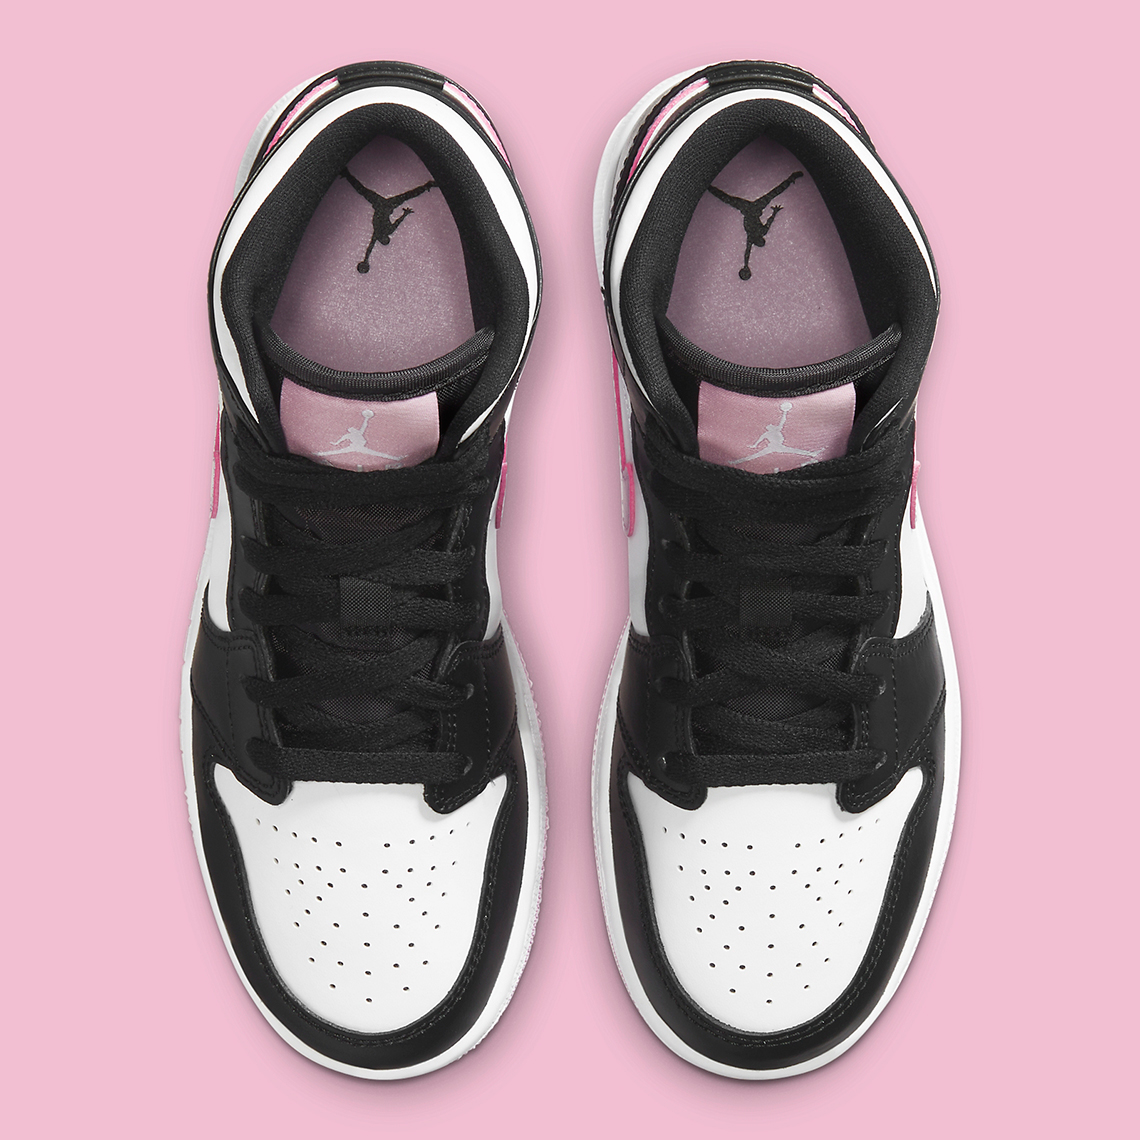 pink white and black ones